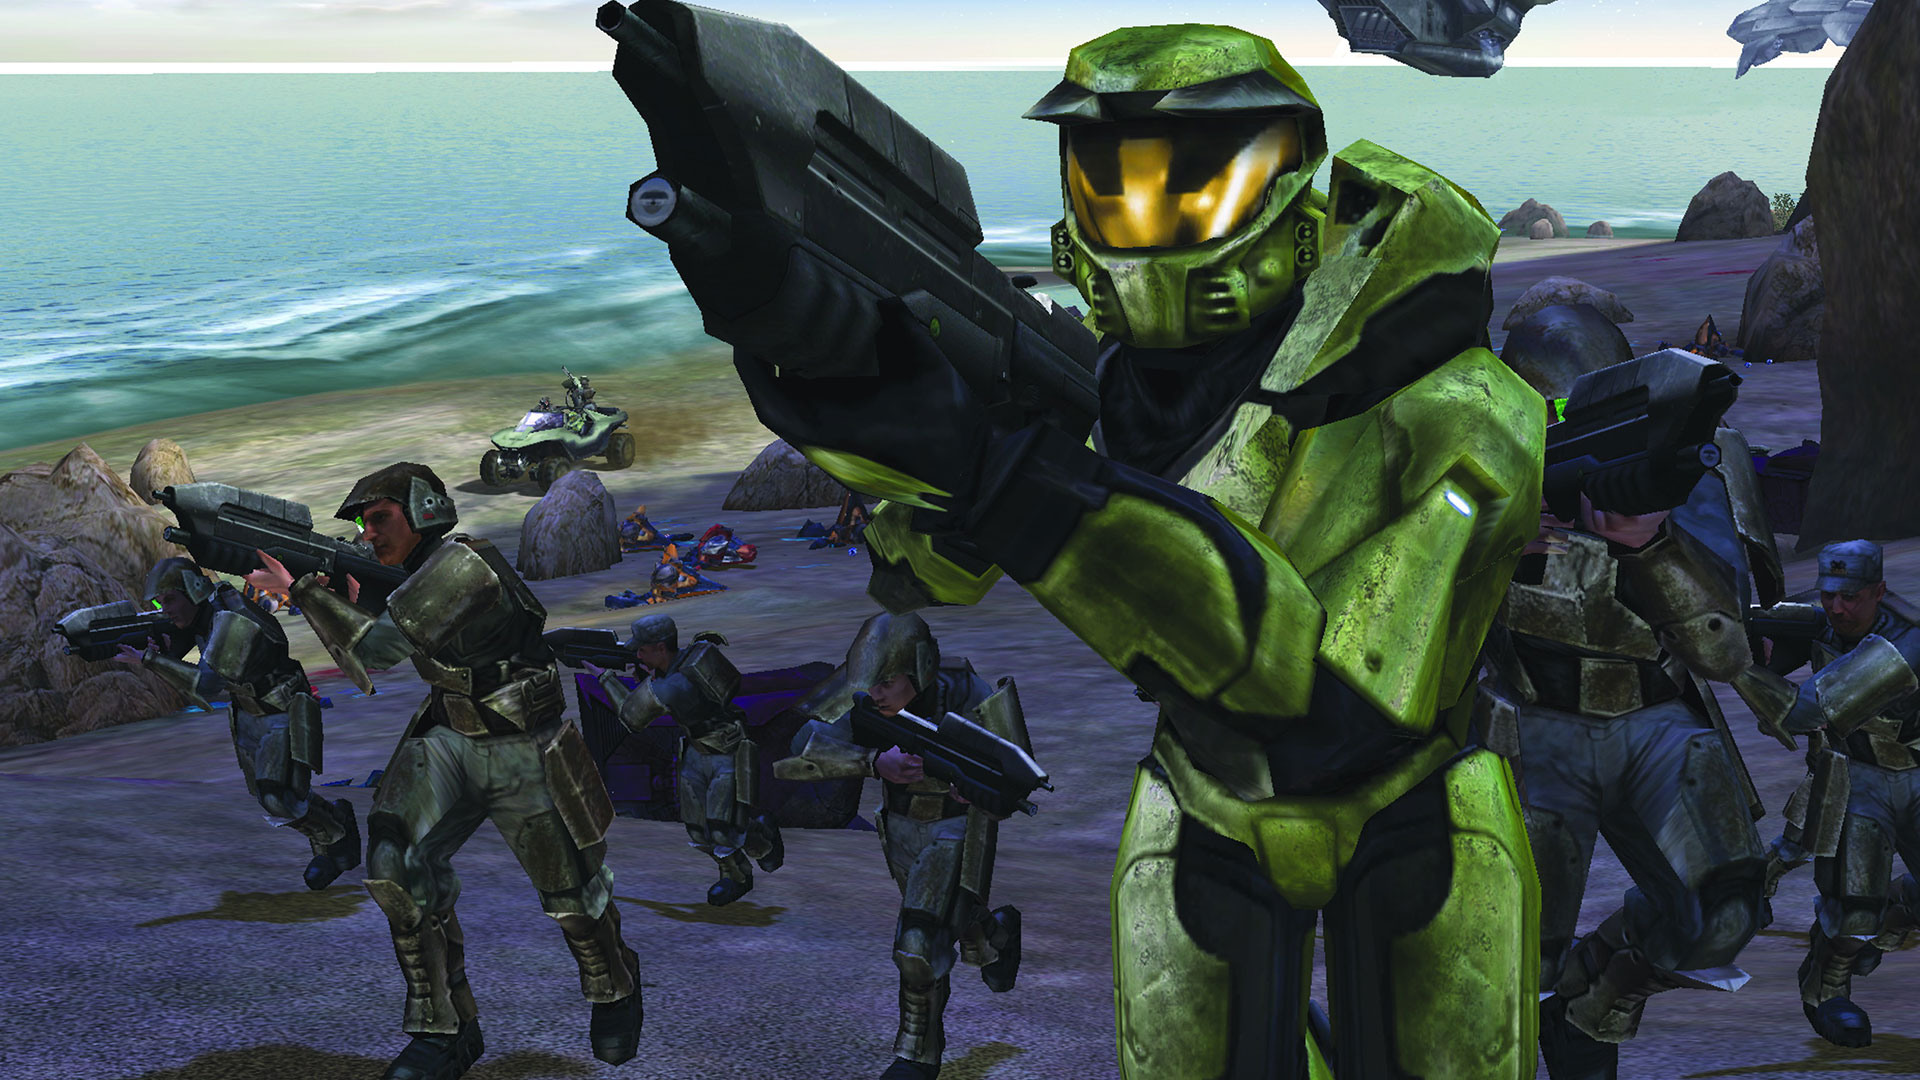 Halo Combat Evolved - Old But Gold#6